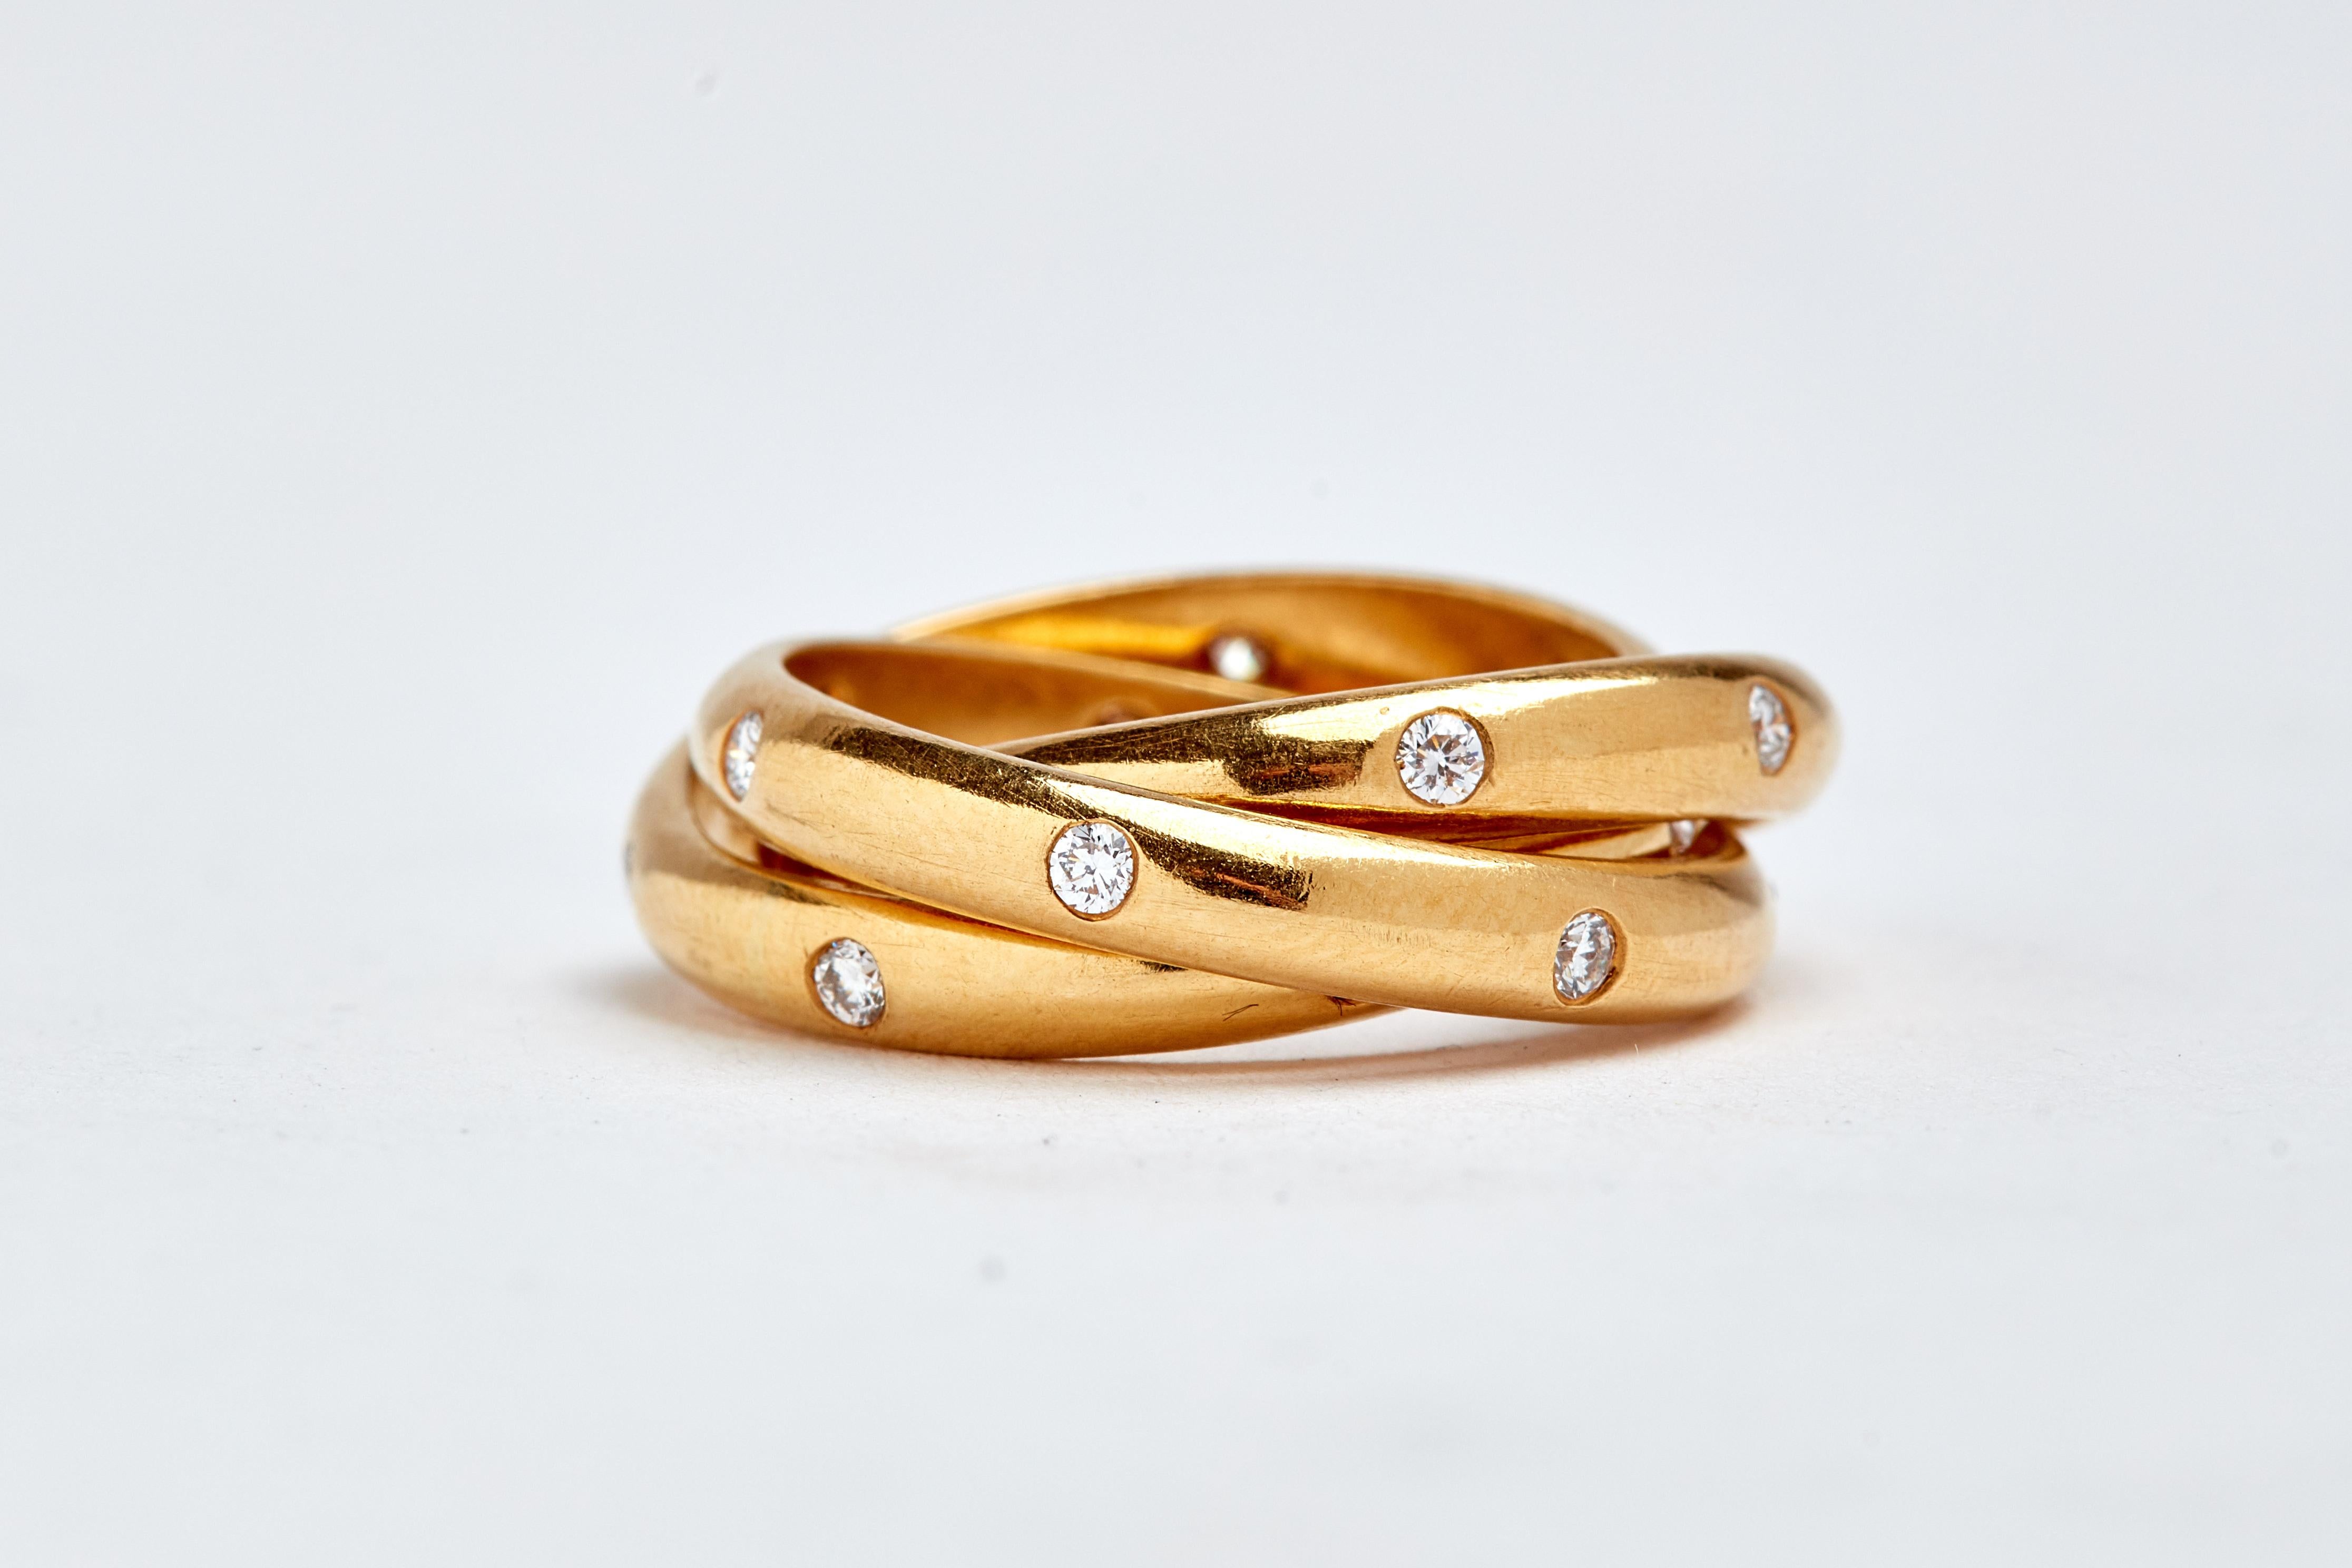 18k yellow gold triple rolling ring with diamonds. 24 round white diamonds. aprox 0.75 carats total. size 5.25